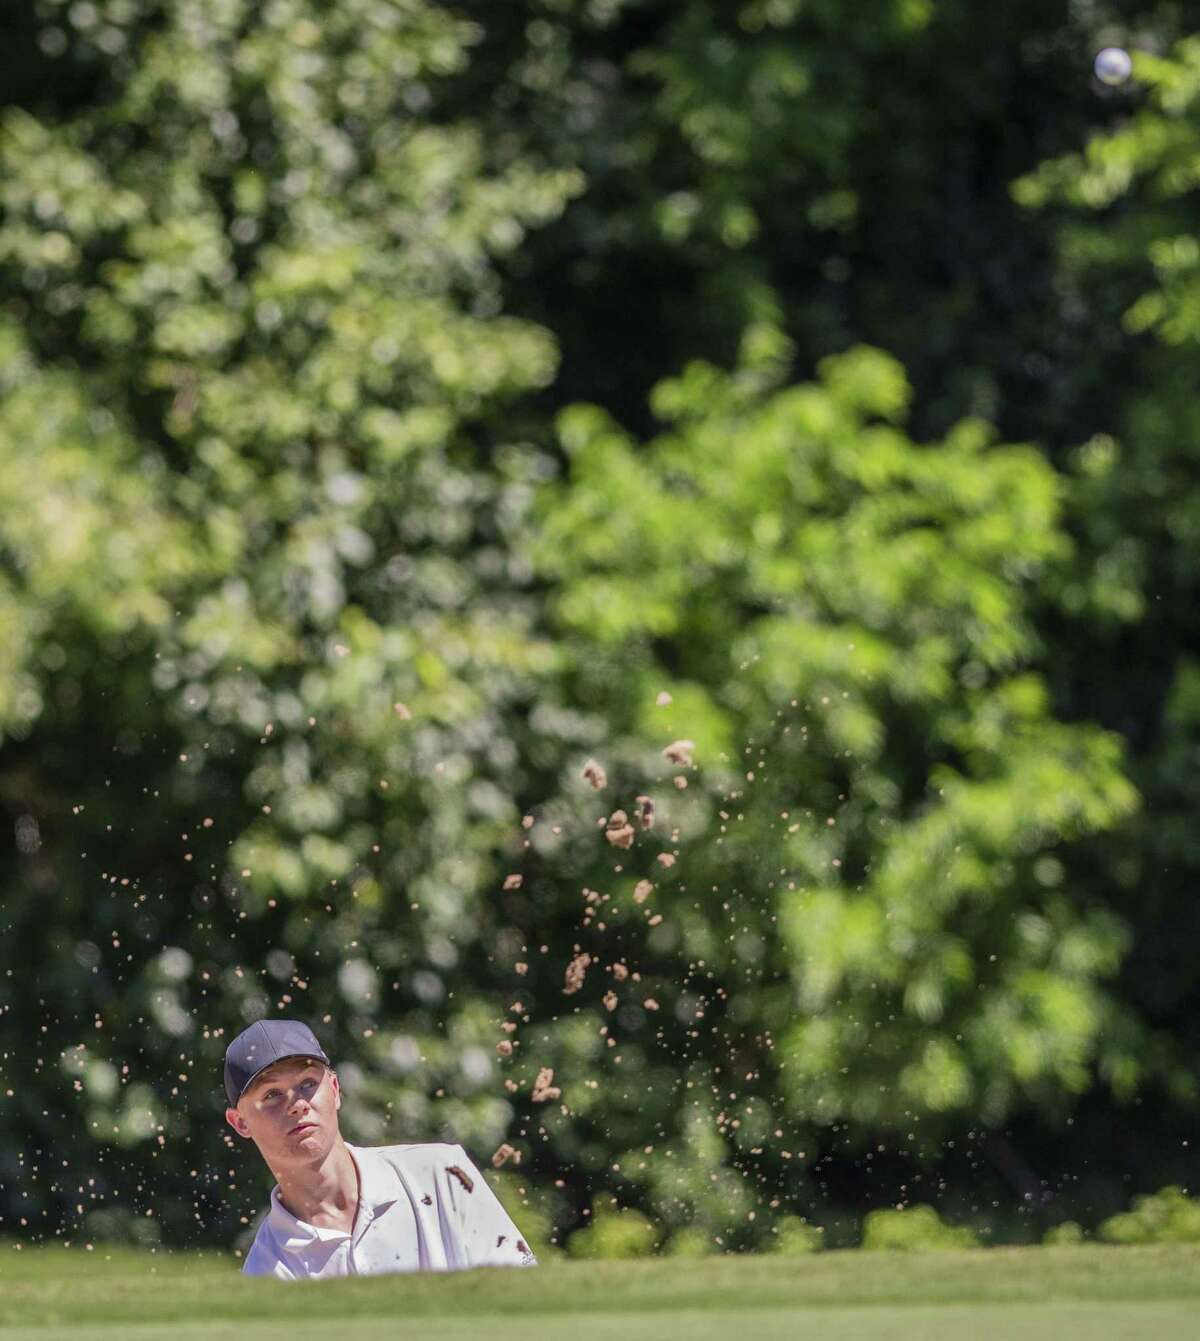 Clark’s Garrett Endicott hits one out of the bunker at No. 12, par 4 during the second round of the Region IV-6A golf tournament at the Republic Golf Club on Thursday, Apr. 25, 2019.